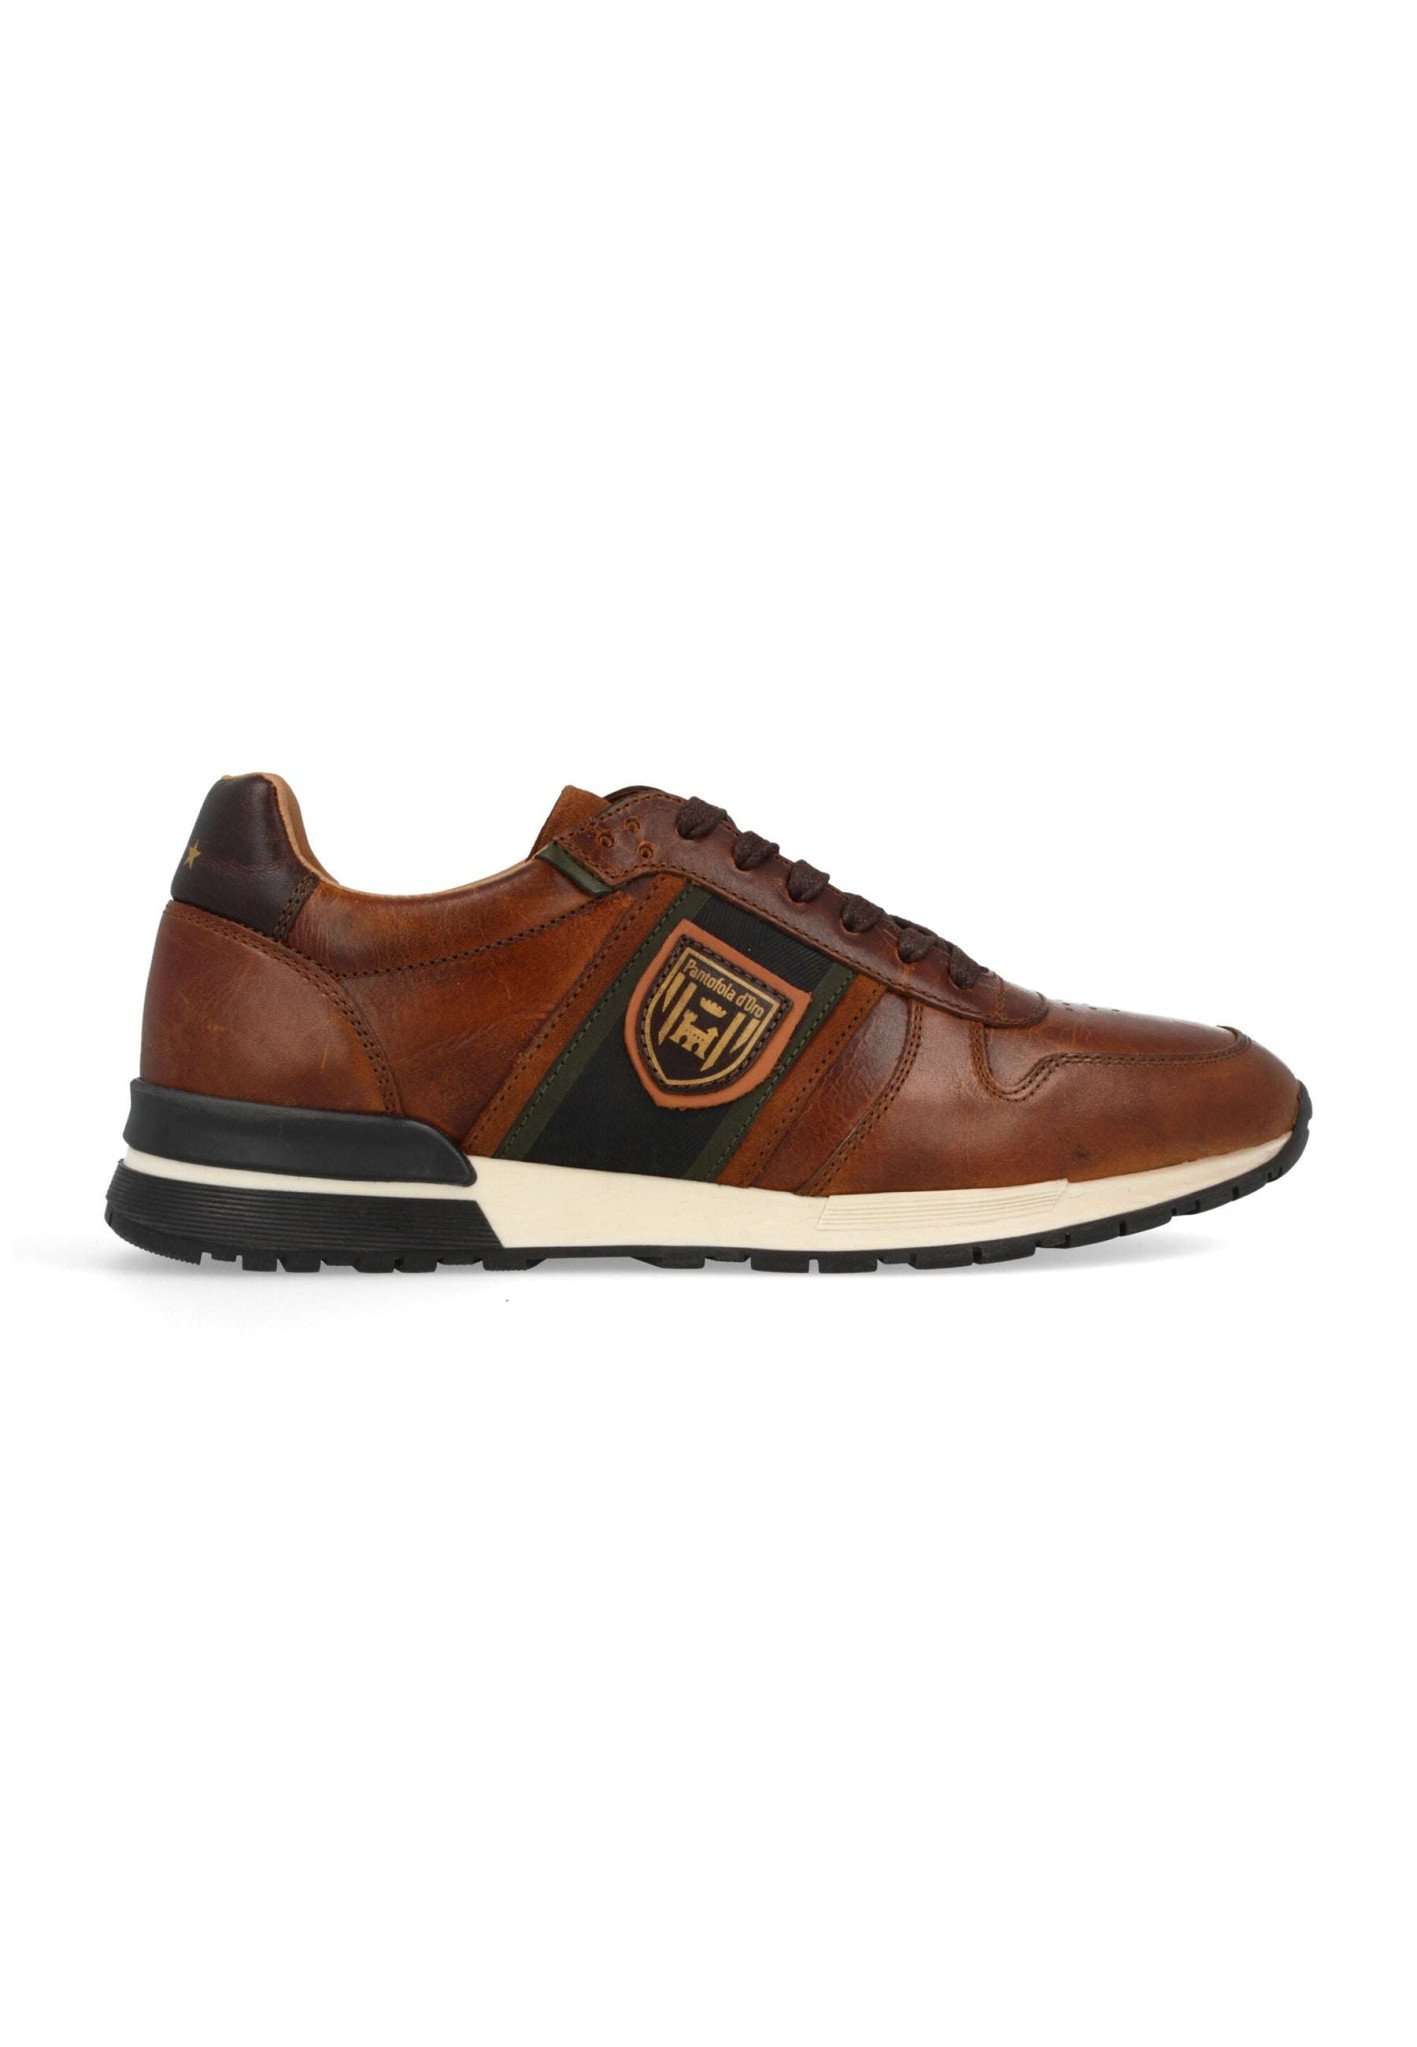 Sangano Low in Tortoise Shell Sneakers Pantofola d'Oro   